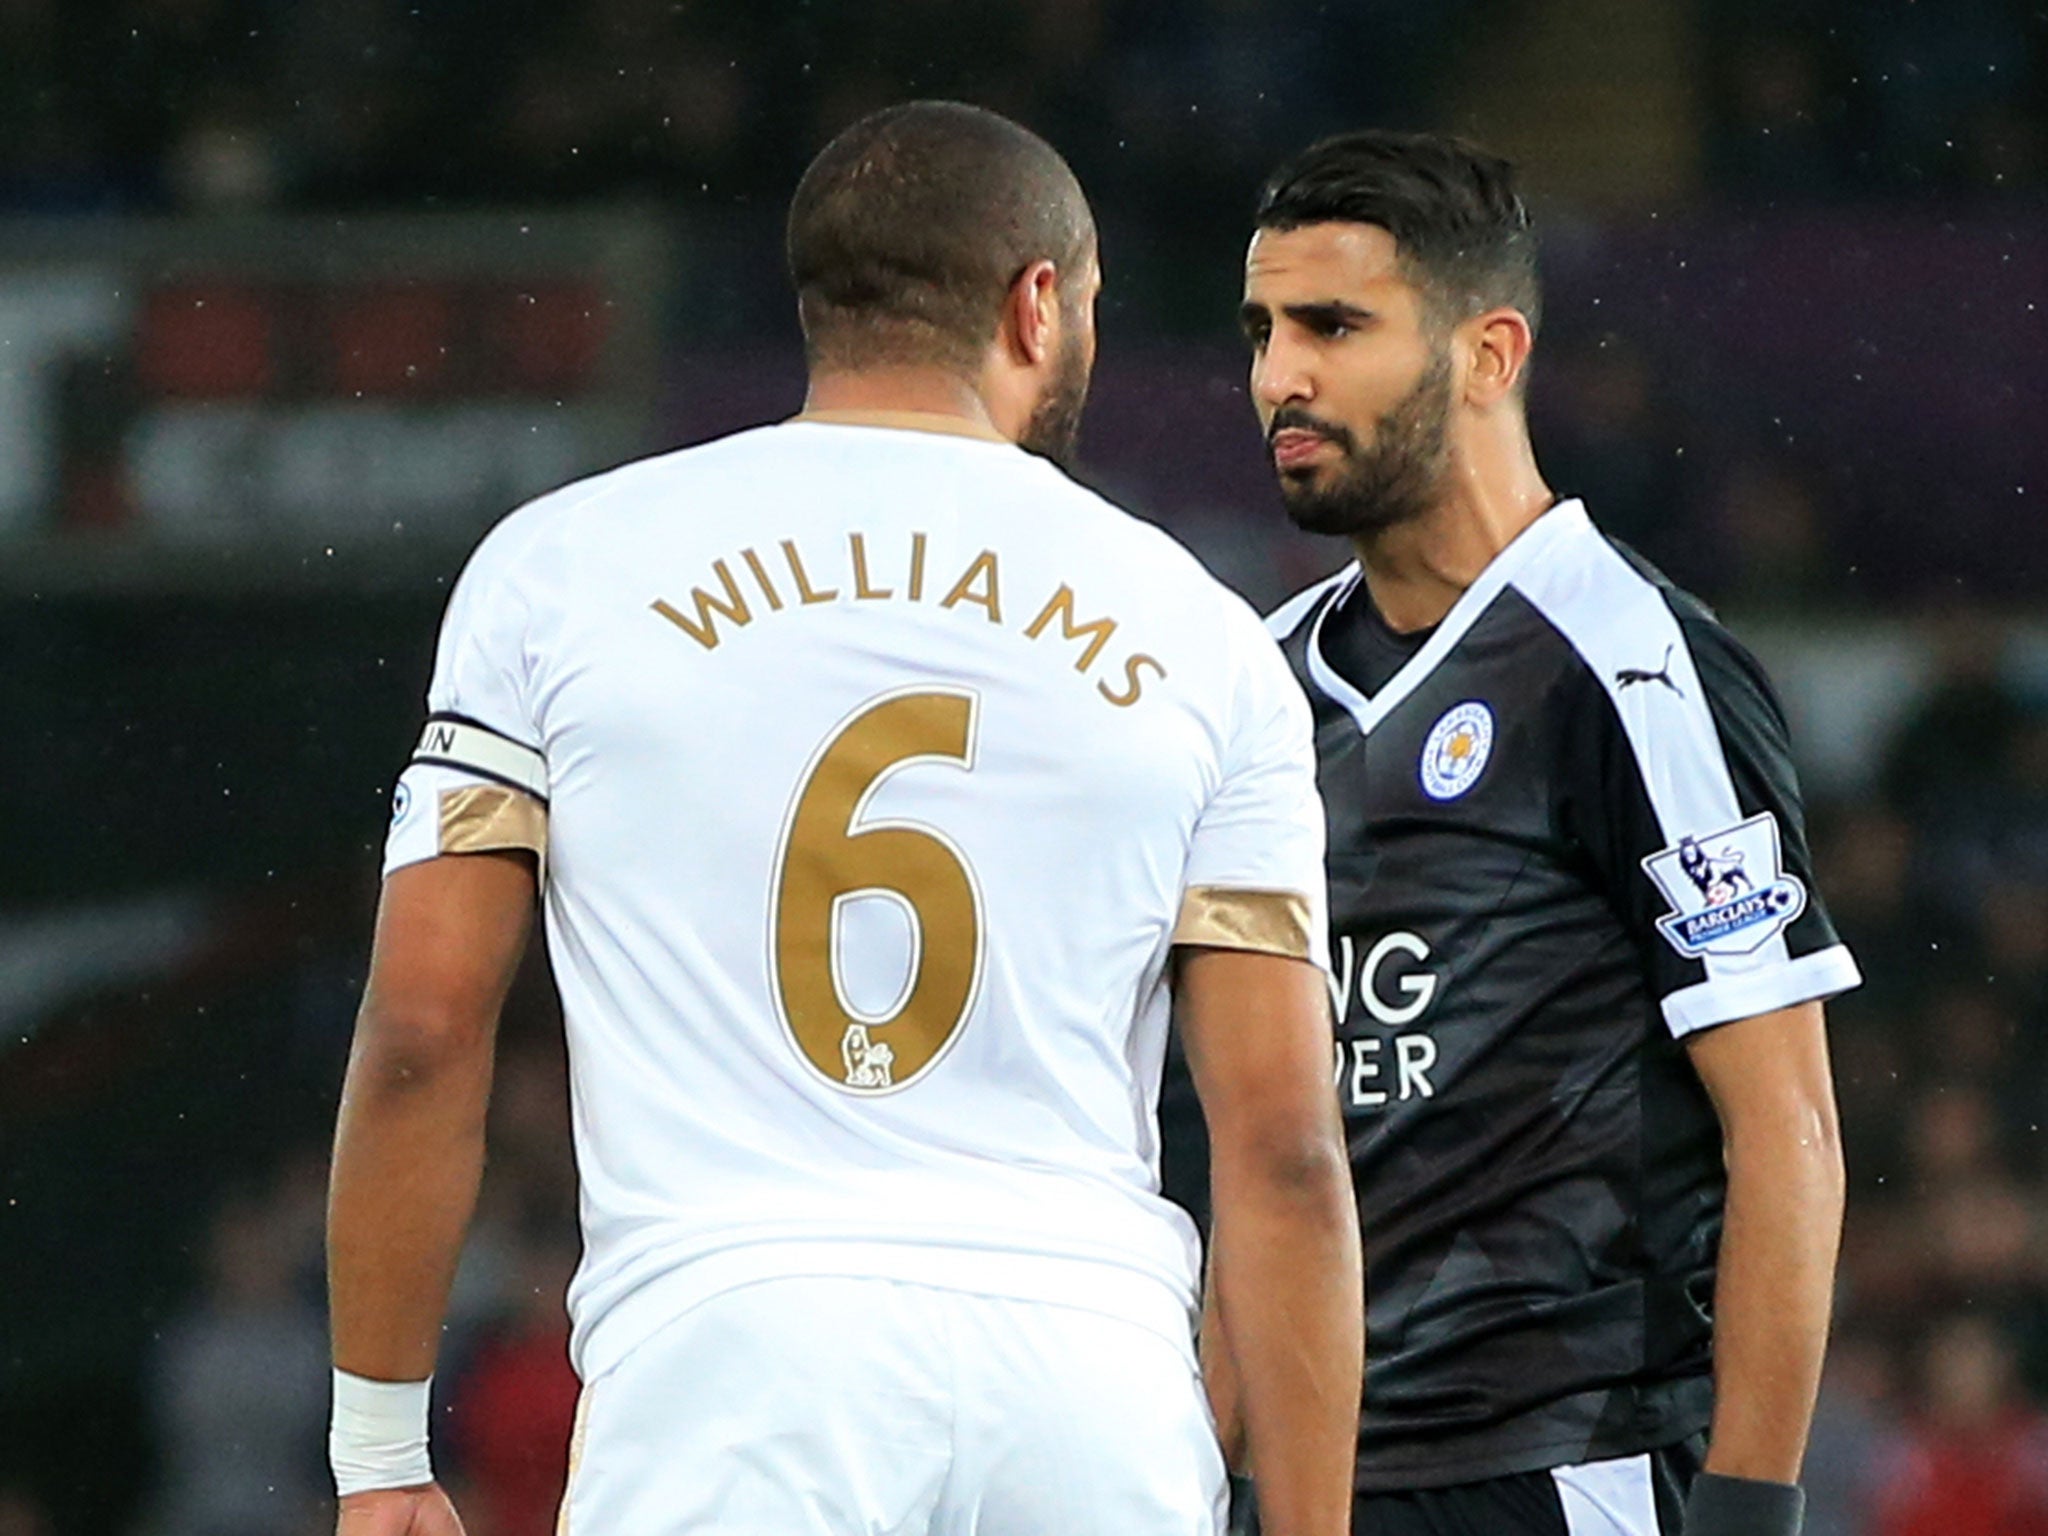 Riyad Mahrez (right) and Ashley Williams (left) had to be separated after the final whistle